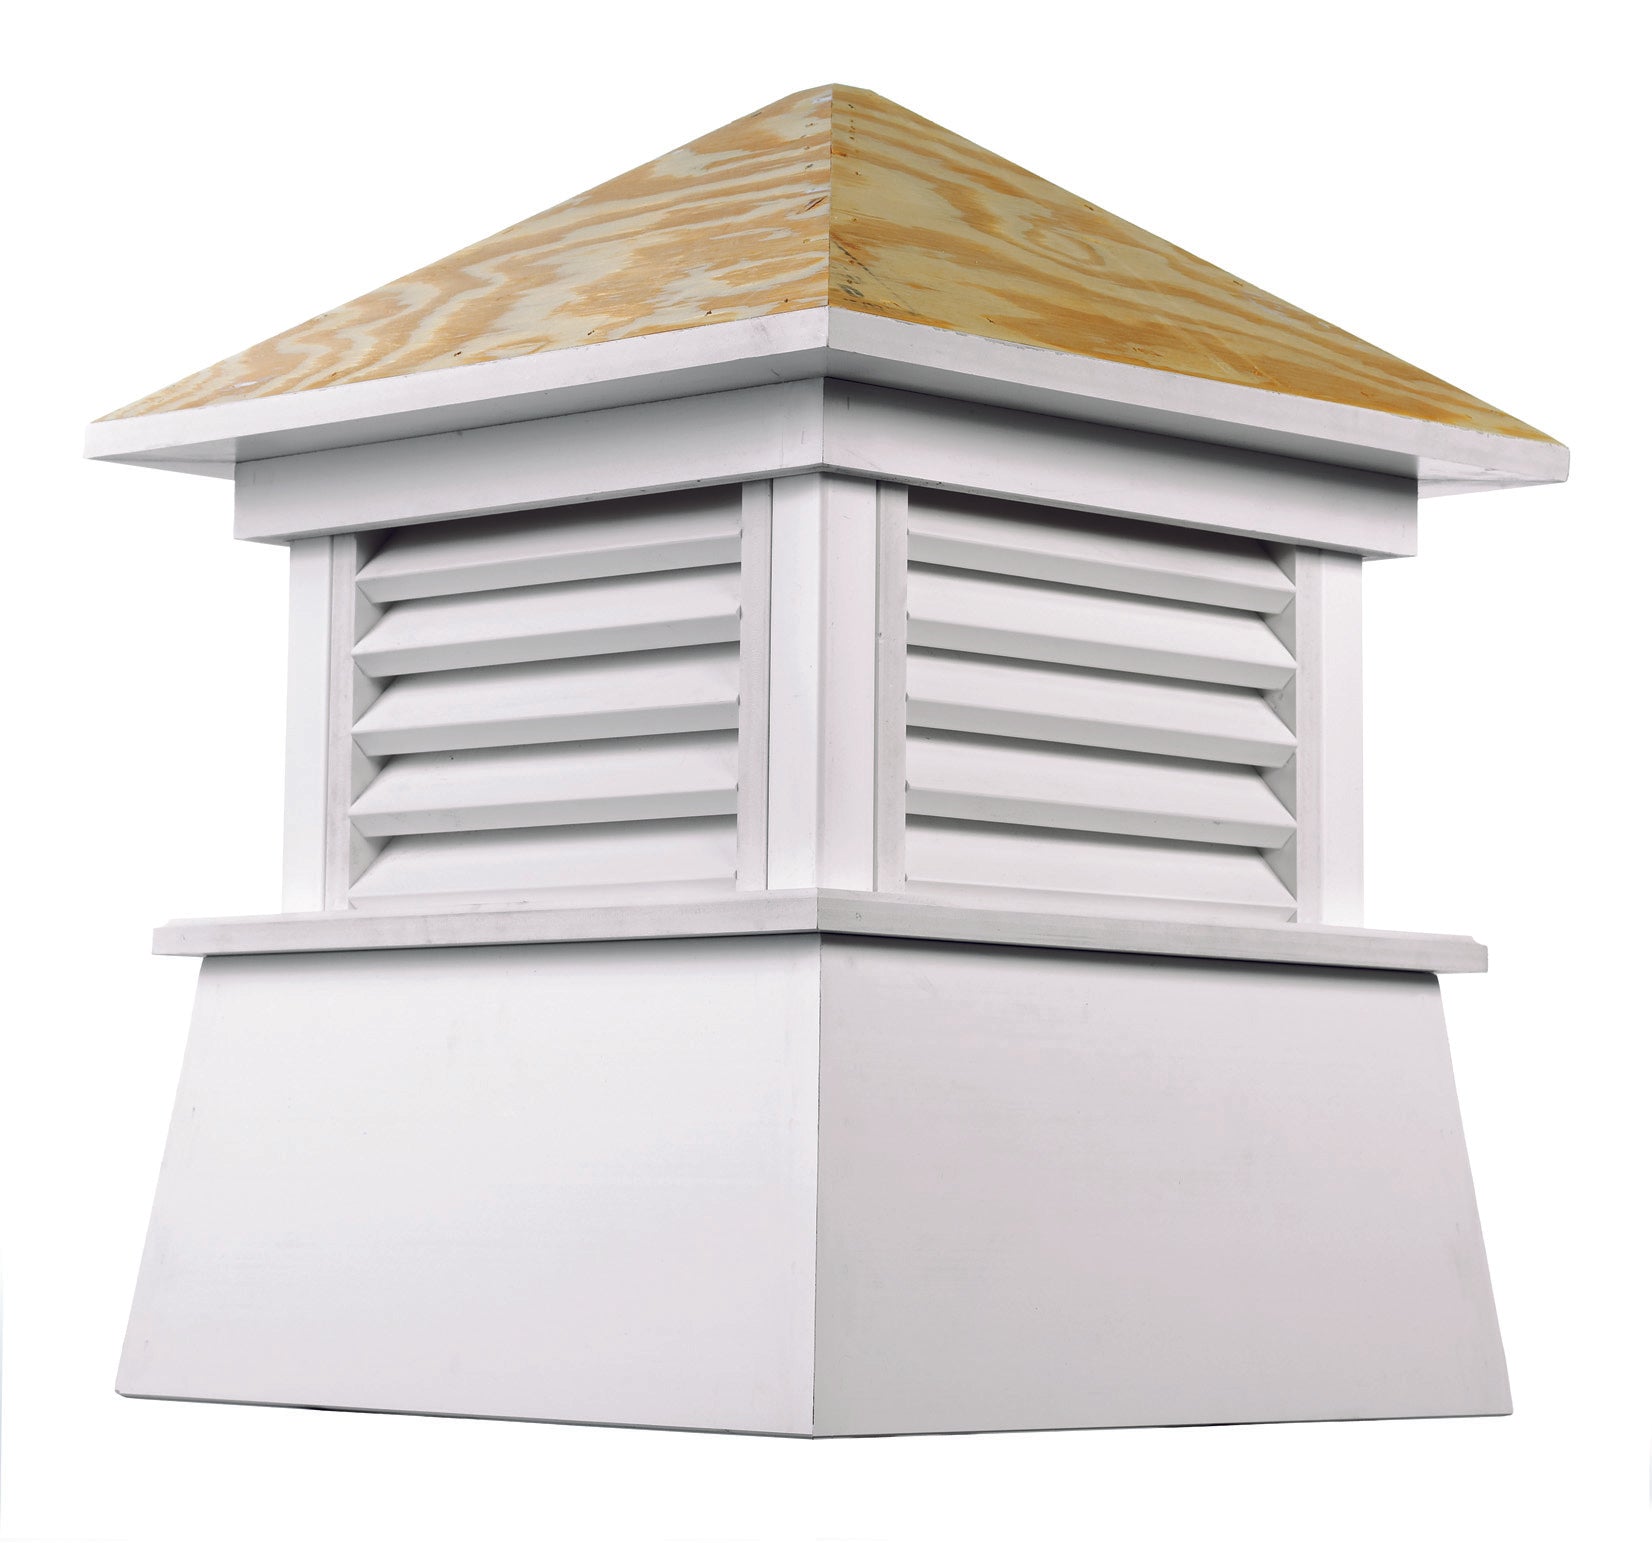 Kent Vinyl Cupola with Wood Roof - Good Directions